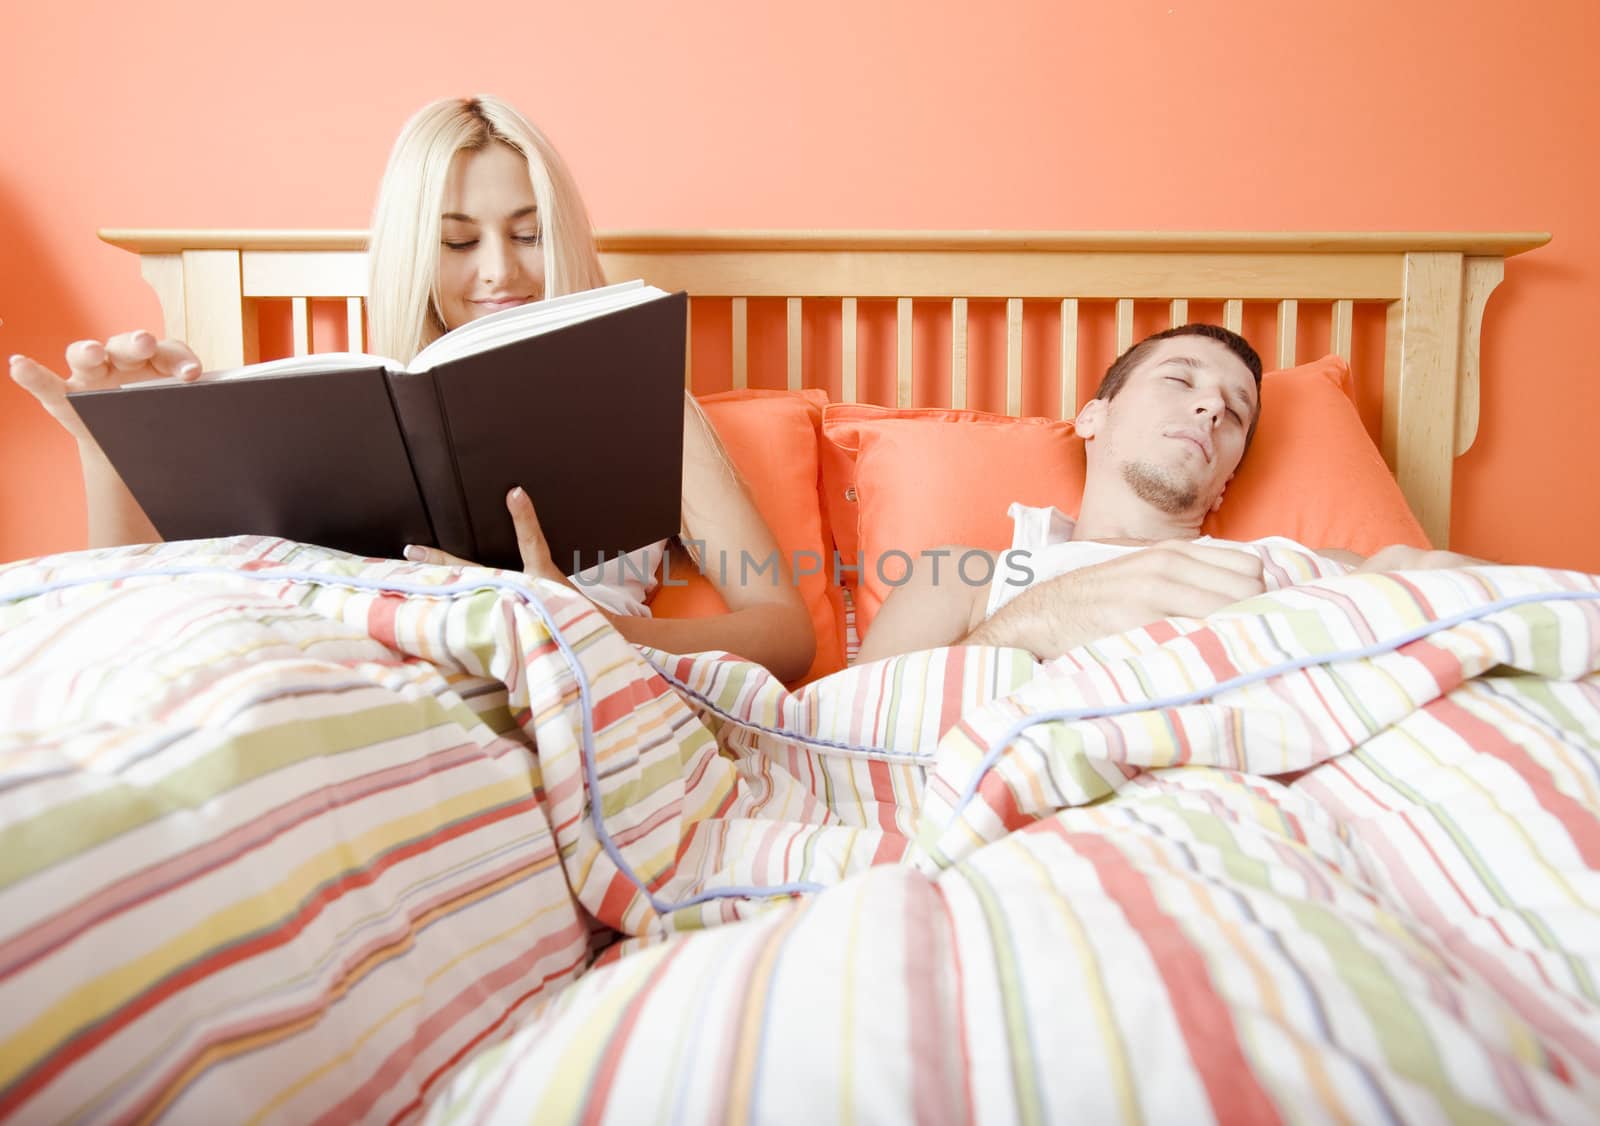 View of couple in bed, with woman reading book and man sleeping. Horizontal format.